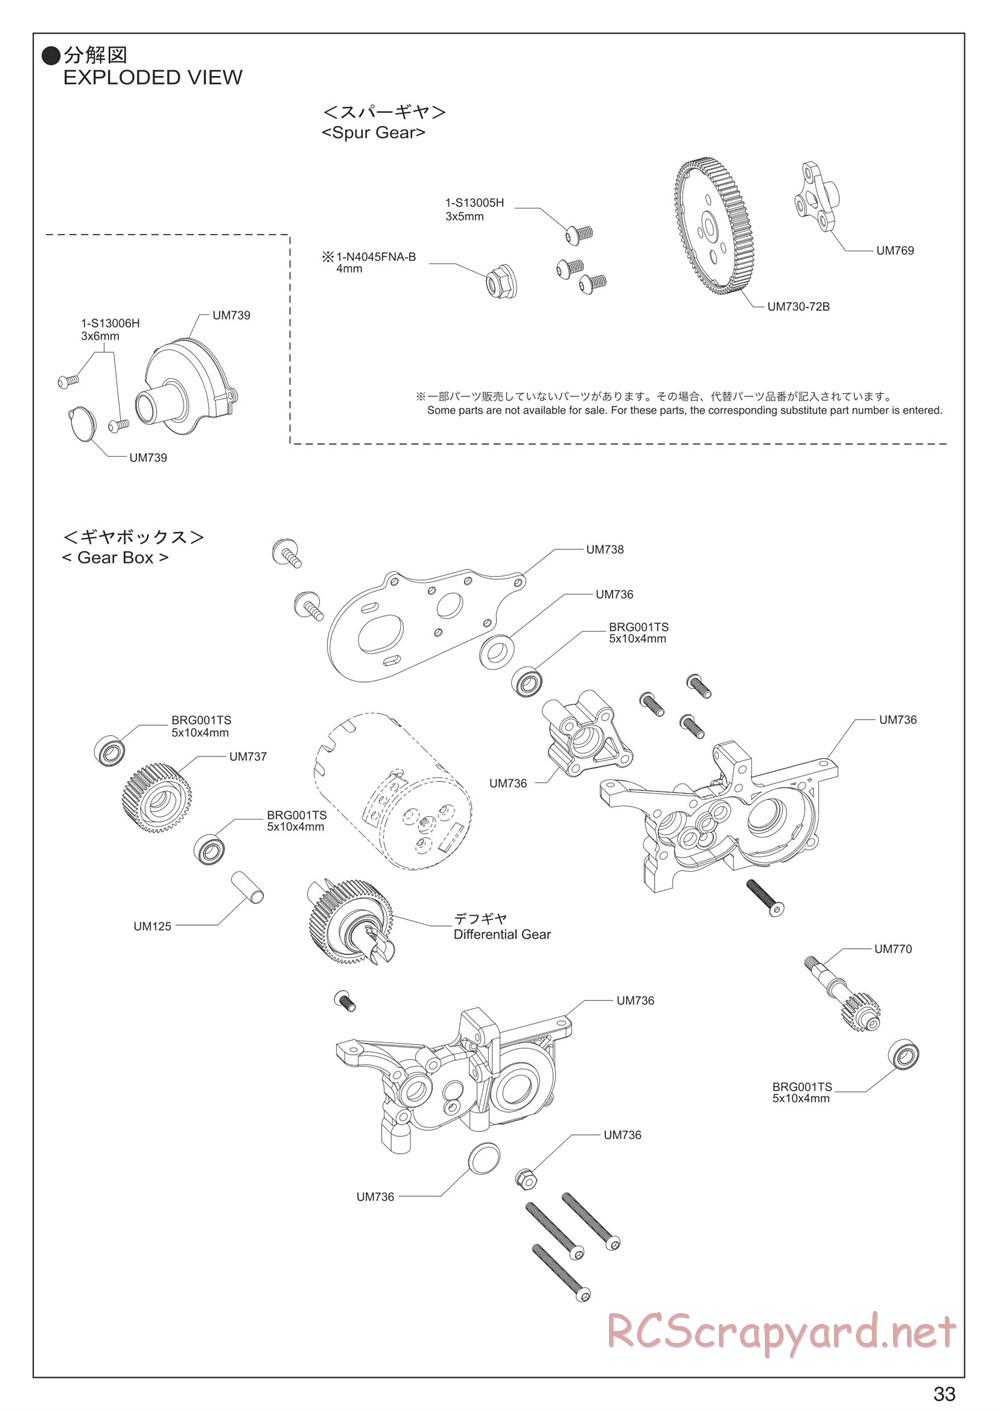 Kyosho - Ultima RB7SS - Manual - Page 33